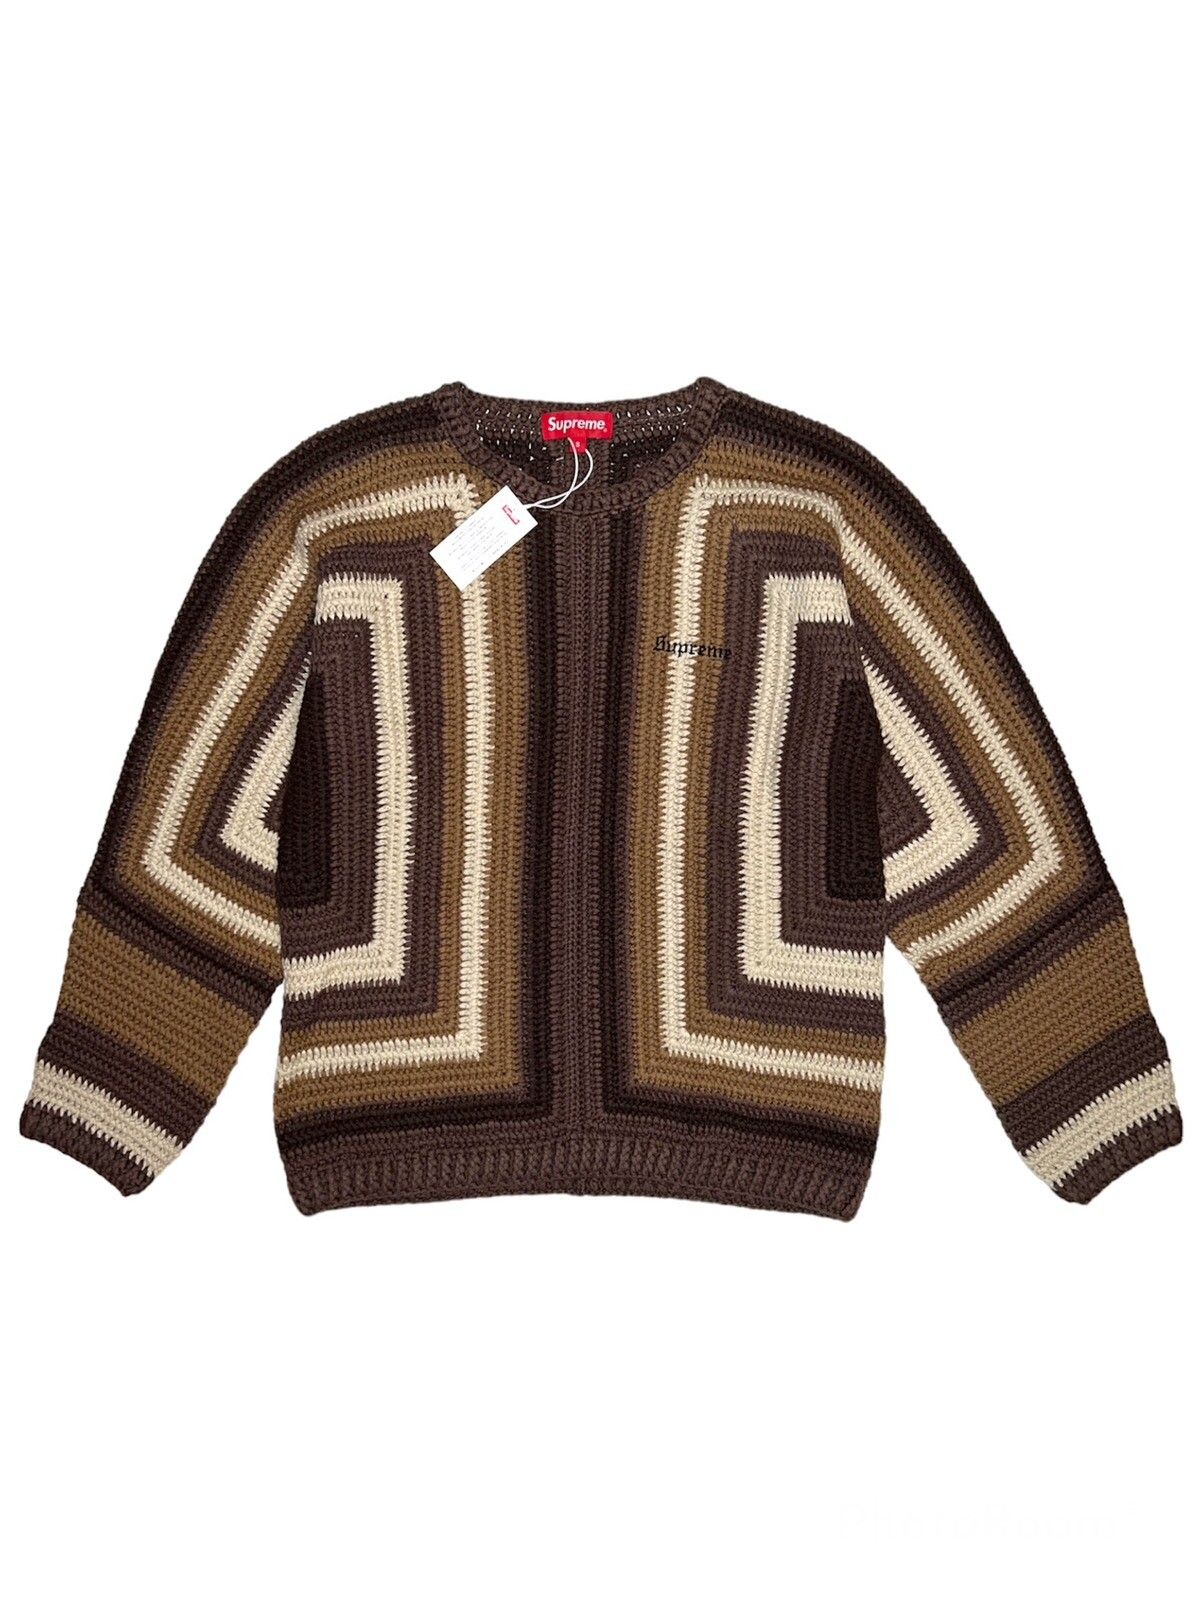 Pre-owned Supreme Crocheted Knit Sweater In Brown